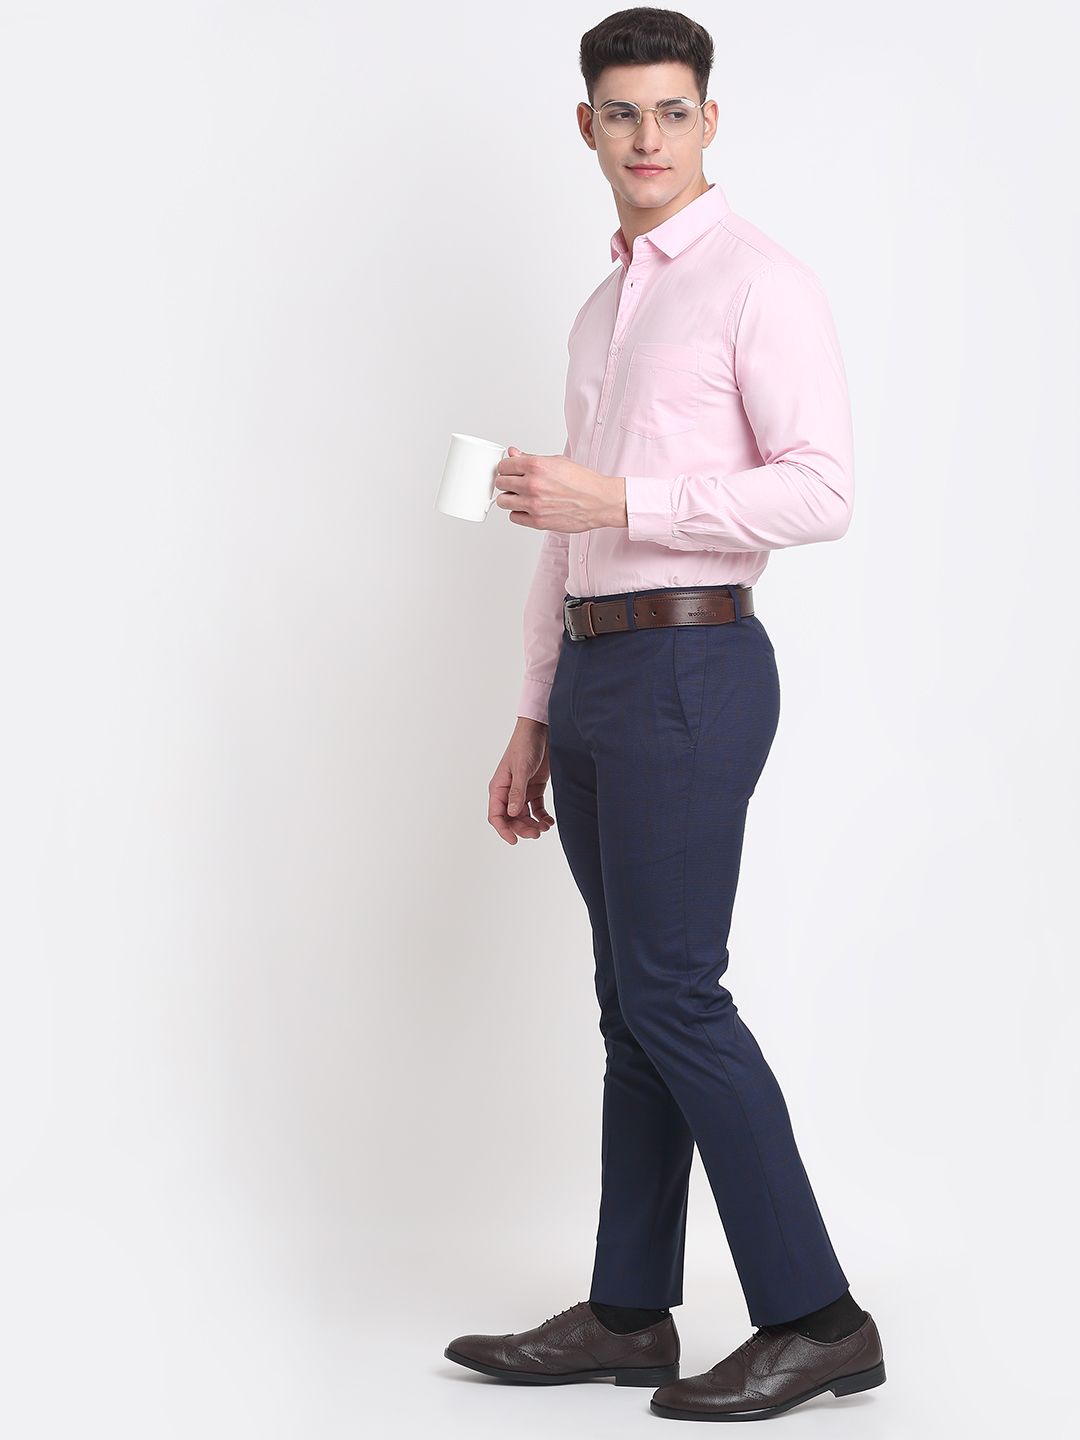 Men blue checked slim fit minimalistic formal trousers